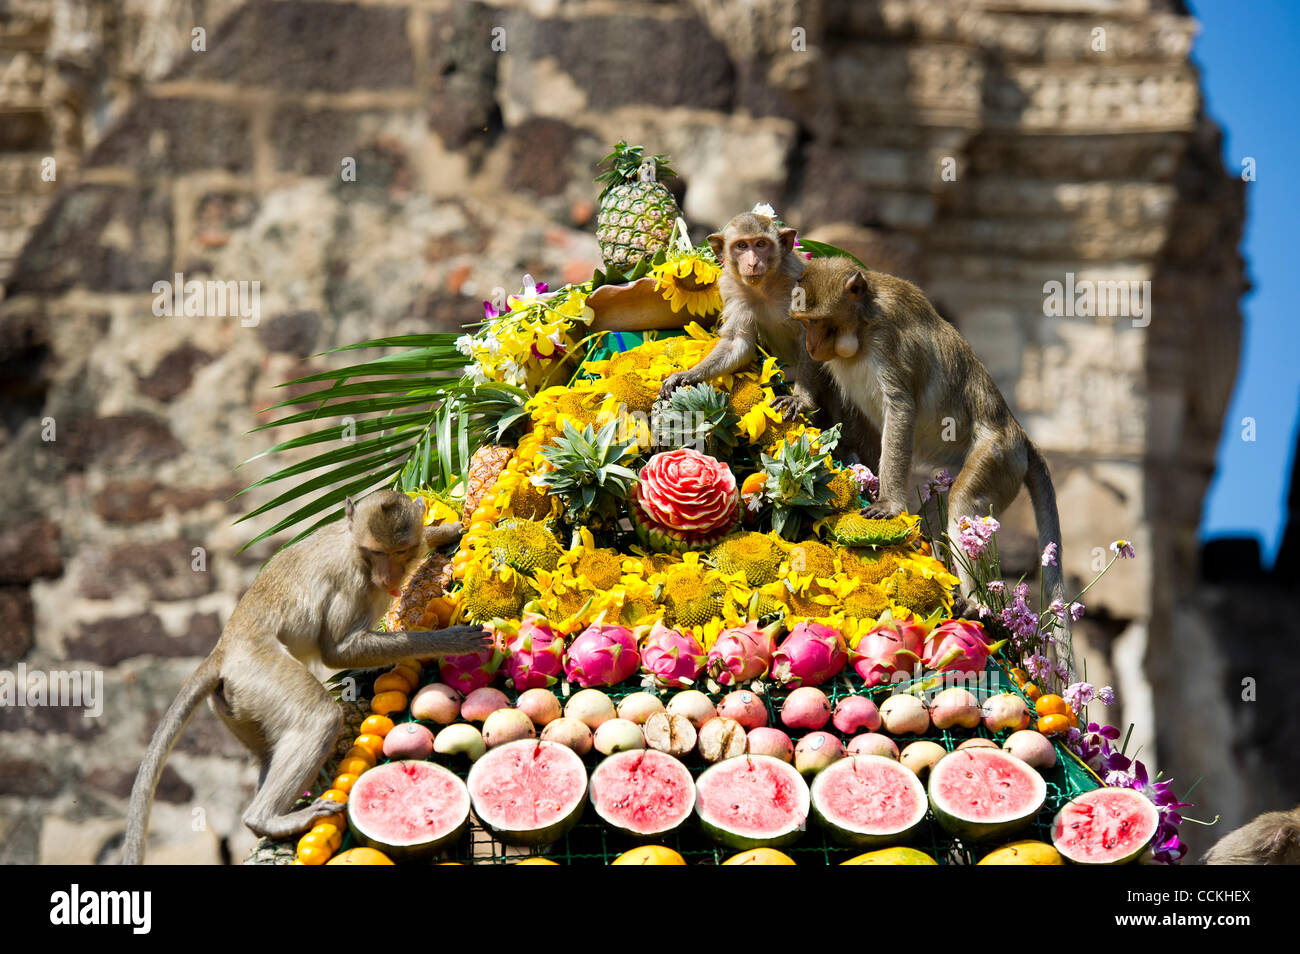 Nov. 28, 2010 - Lopburi, Thailand - Monkeys enjoy eating from pyramid made  of fruit during the annual 'monkey buffet festival' at the Phra Prang Sam  Yod (The Three Crests Phra Prang)